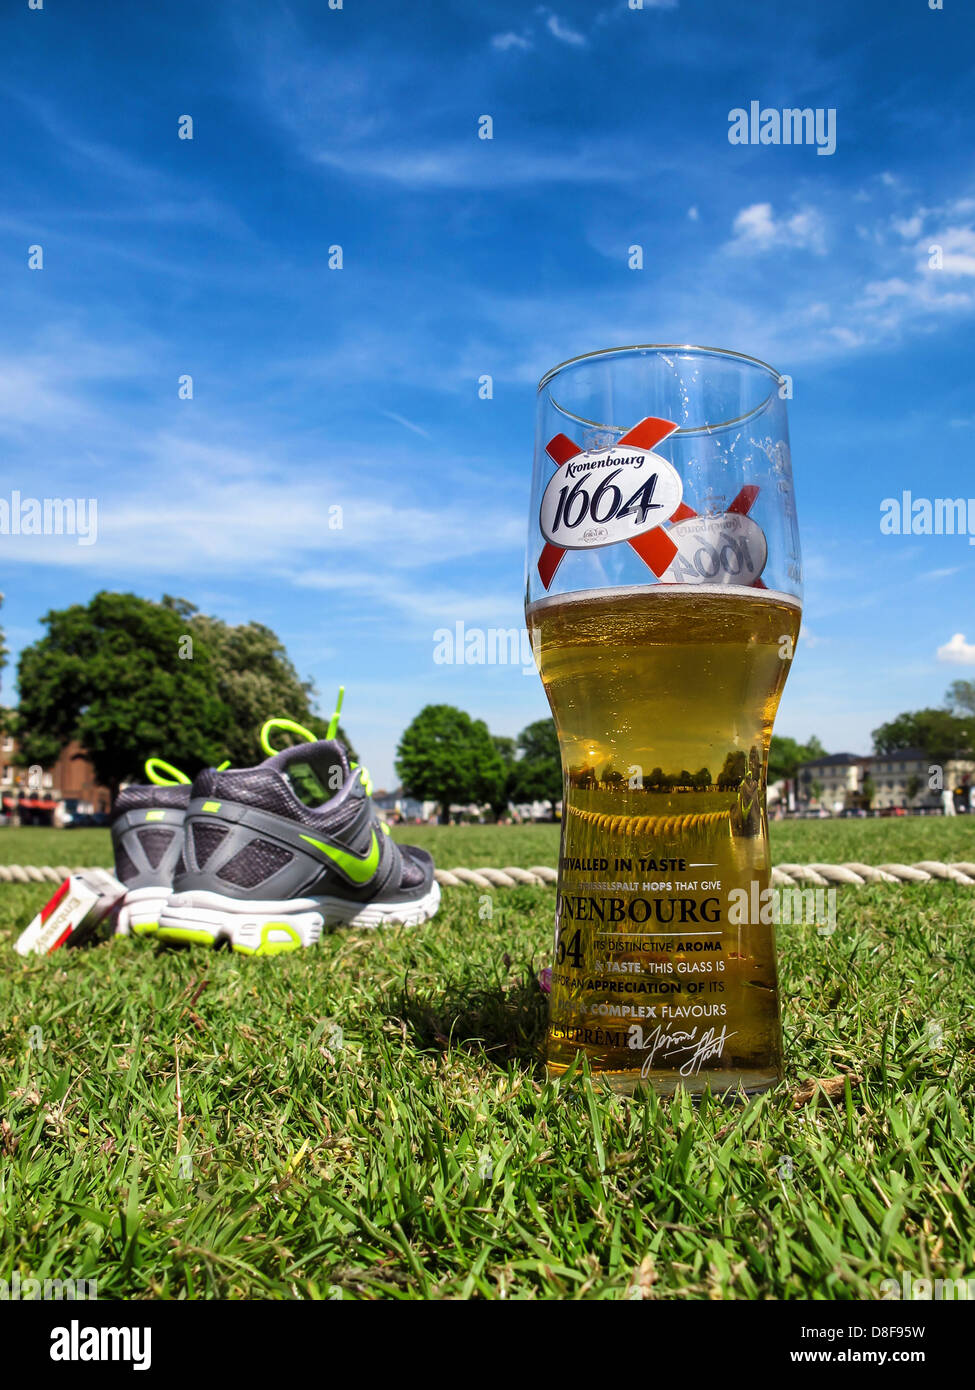 A beer glass, trainers and cigarette pack under a blue sky on Twickenham green in Summer Stock Photo